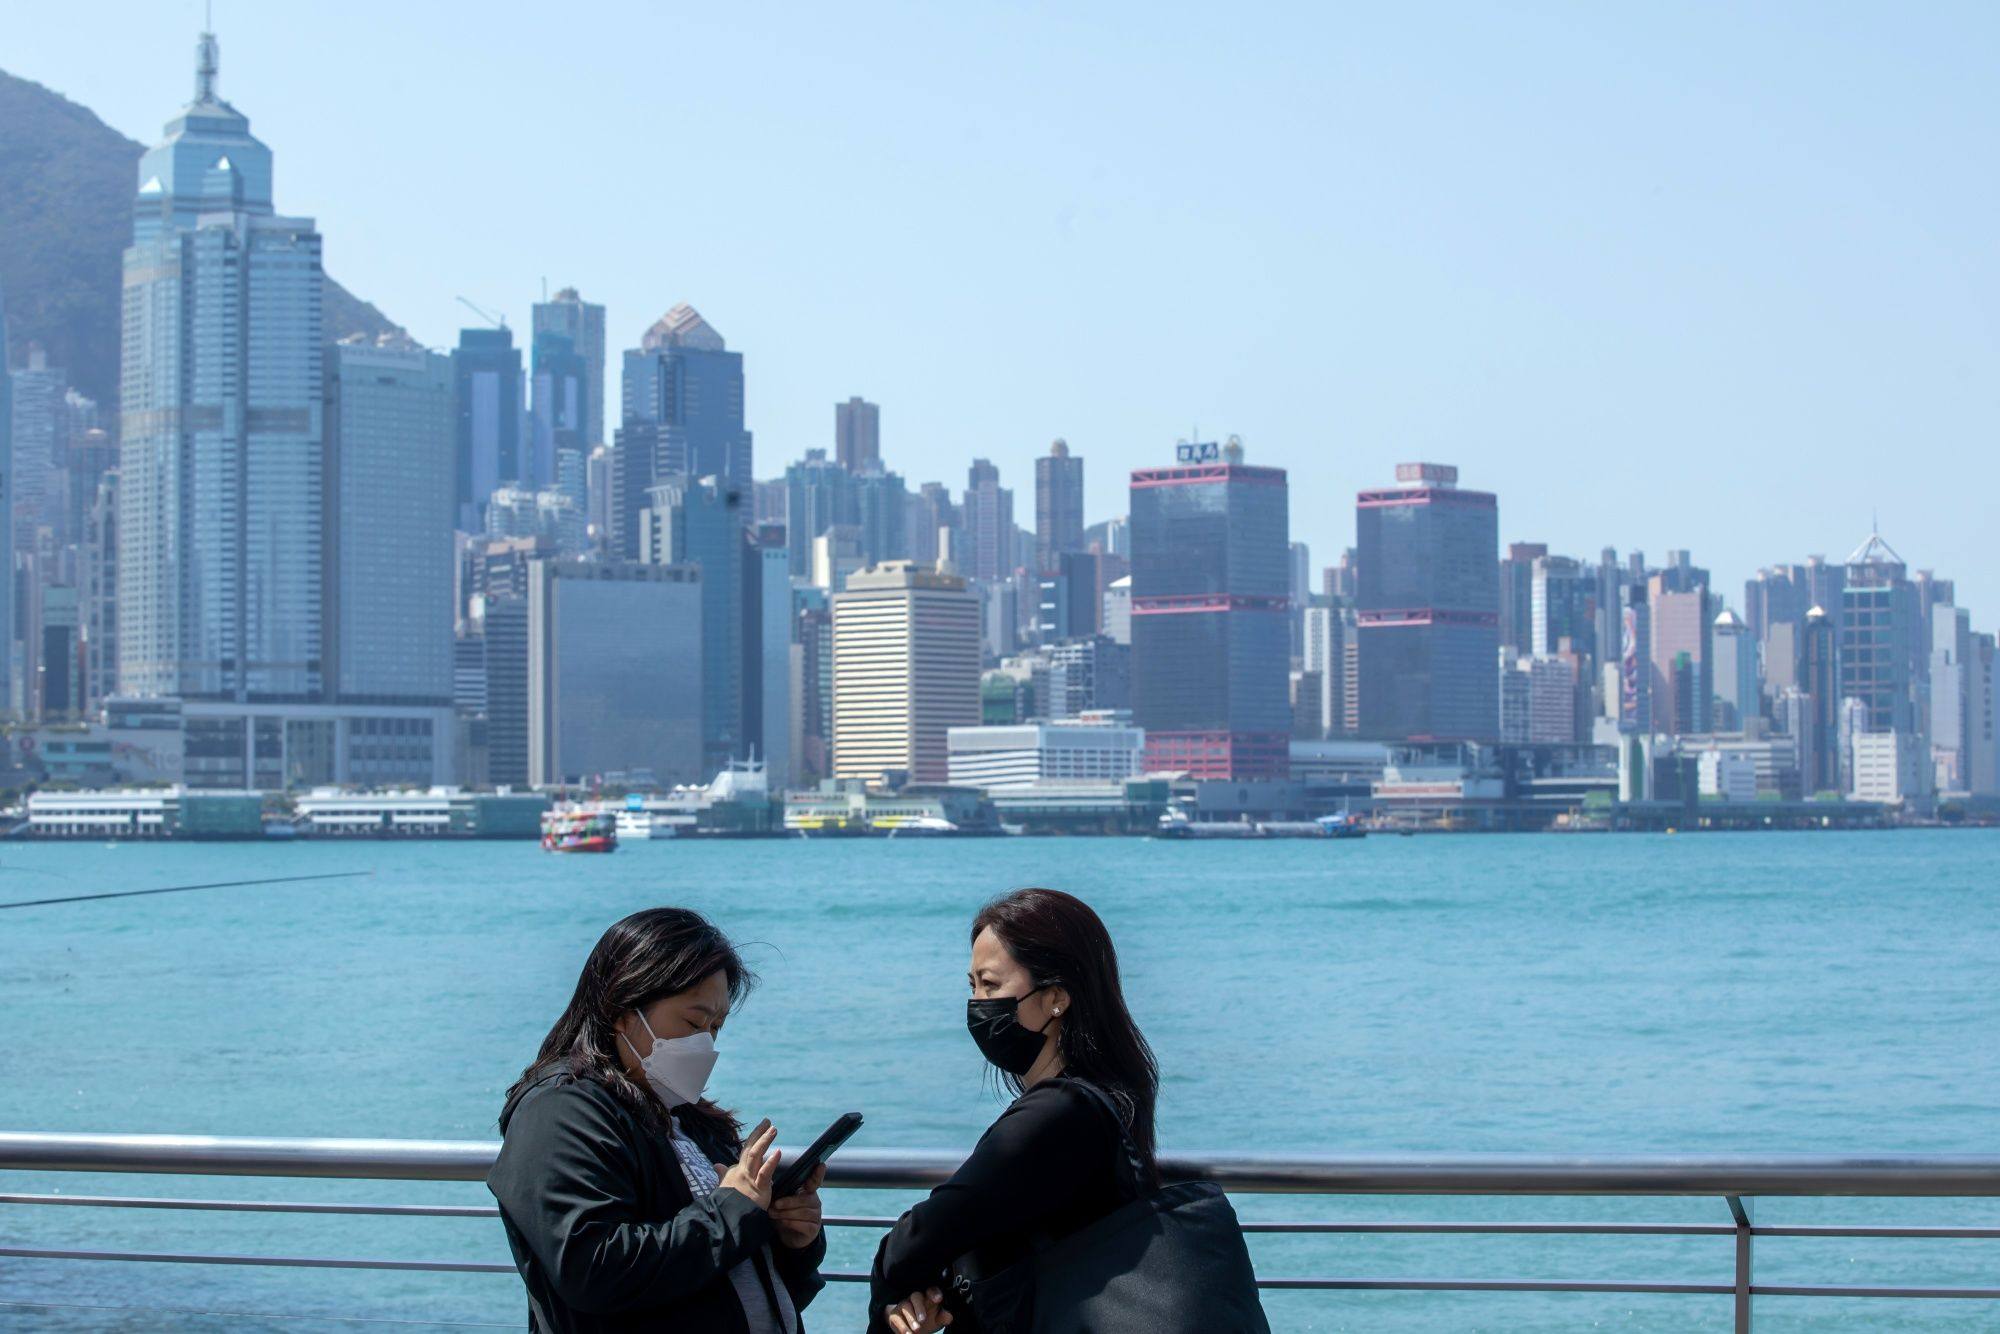 Hong Kong has an abundance of local money, and is attracting a lot of interest from mainland Chinese investors, said Ronnie Chan, co-founder and chairman of the Centre for Asian Philanthropy and Society (CAPS). Photo: Bloomberg